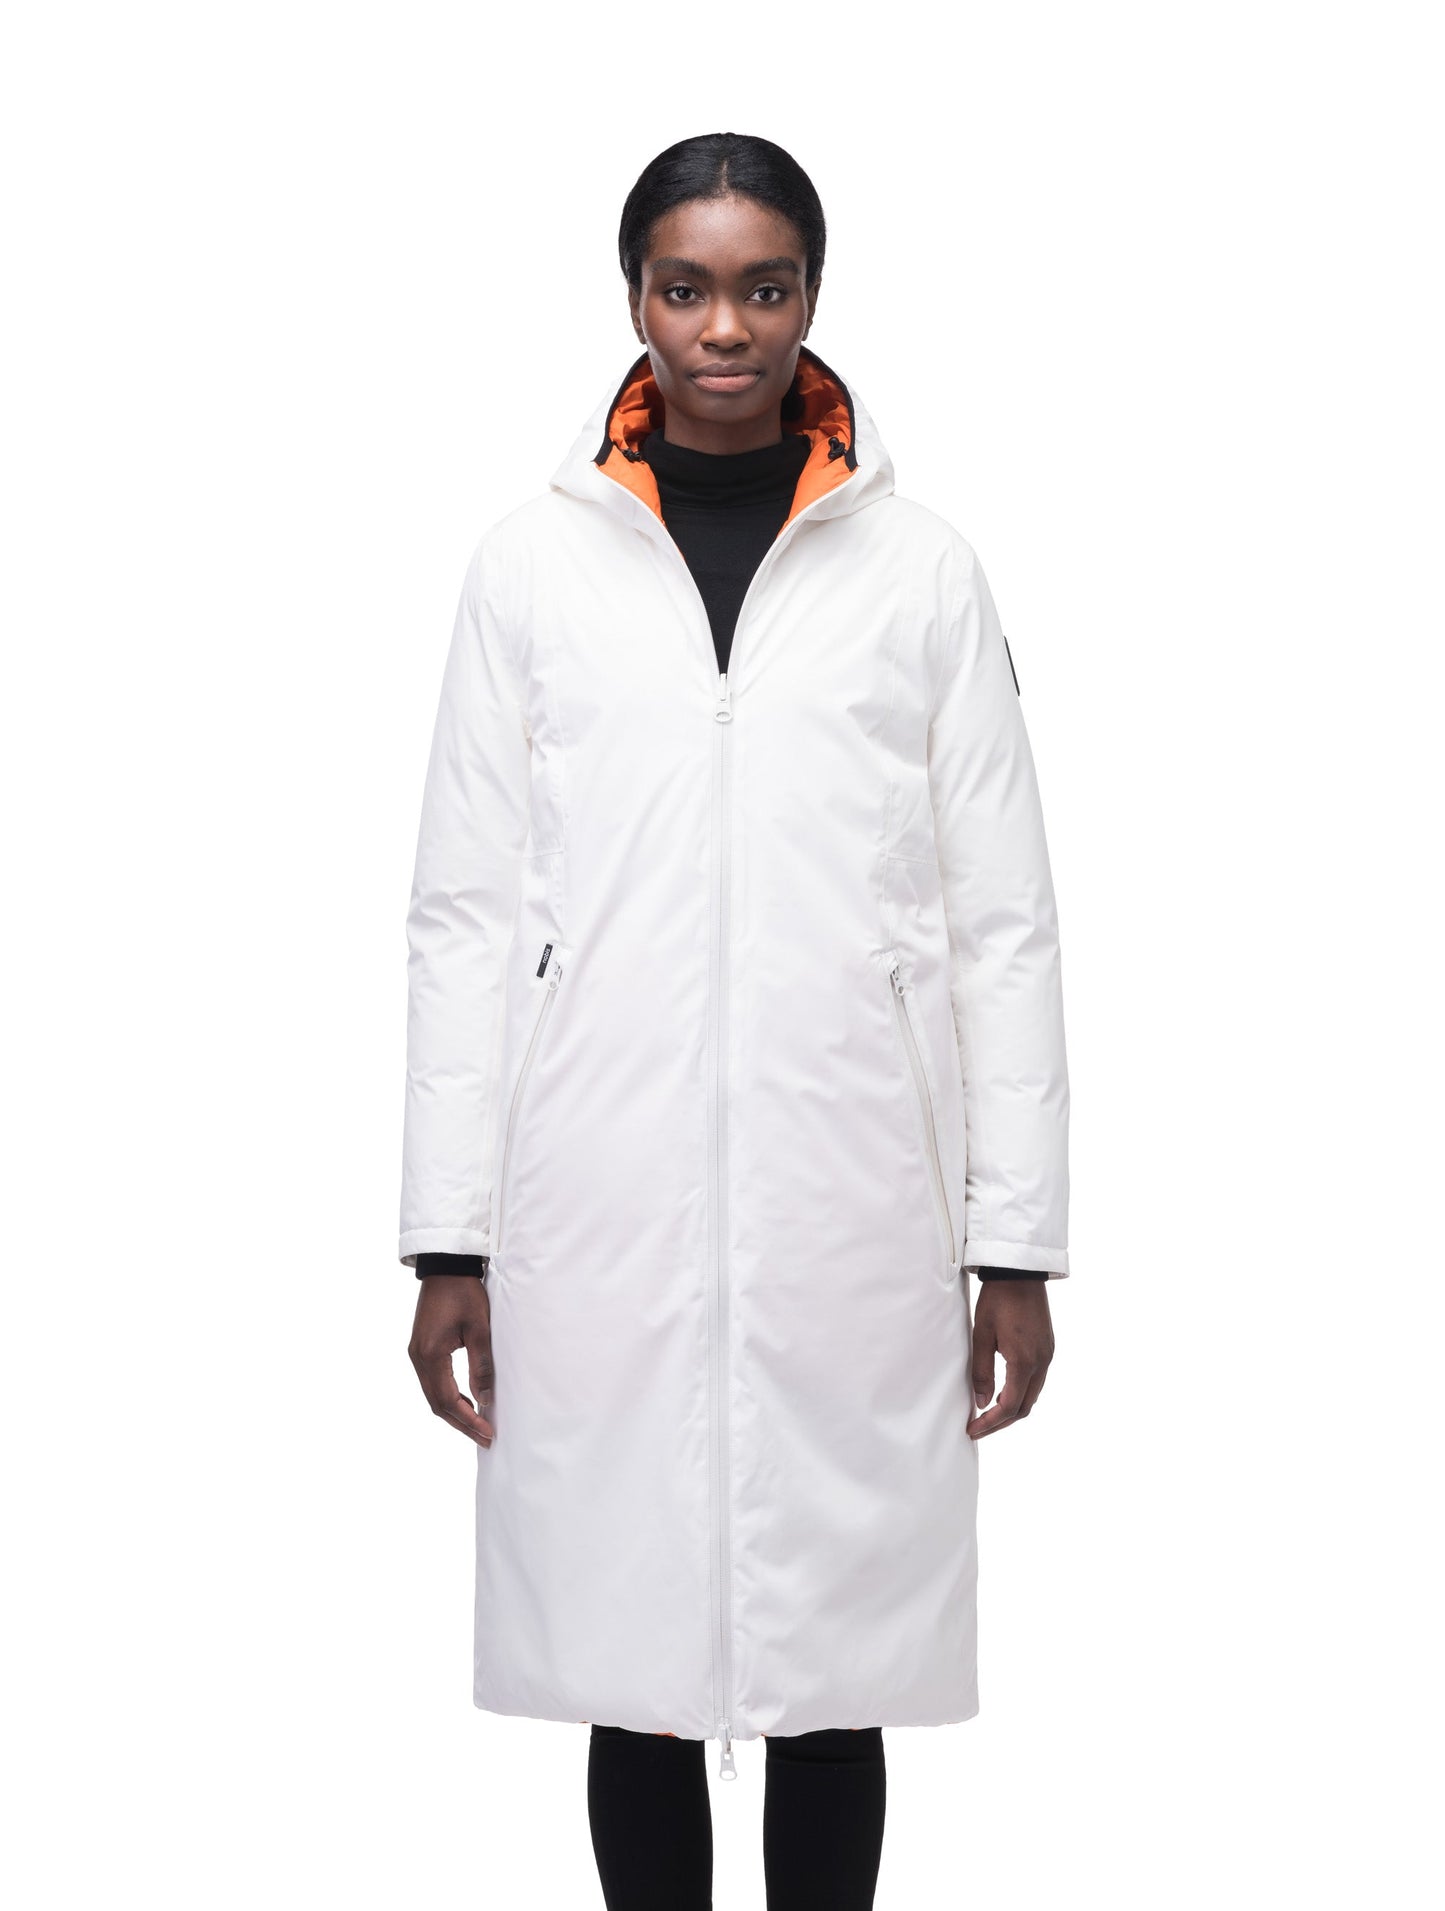 Ladies knee length reversible down-filled parka with non-removable hood in Chalk/Atomic